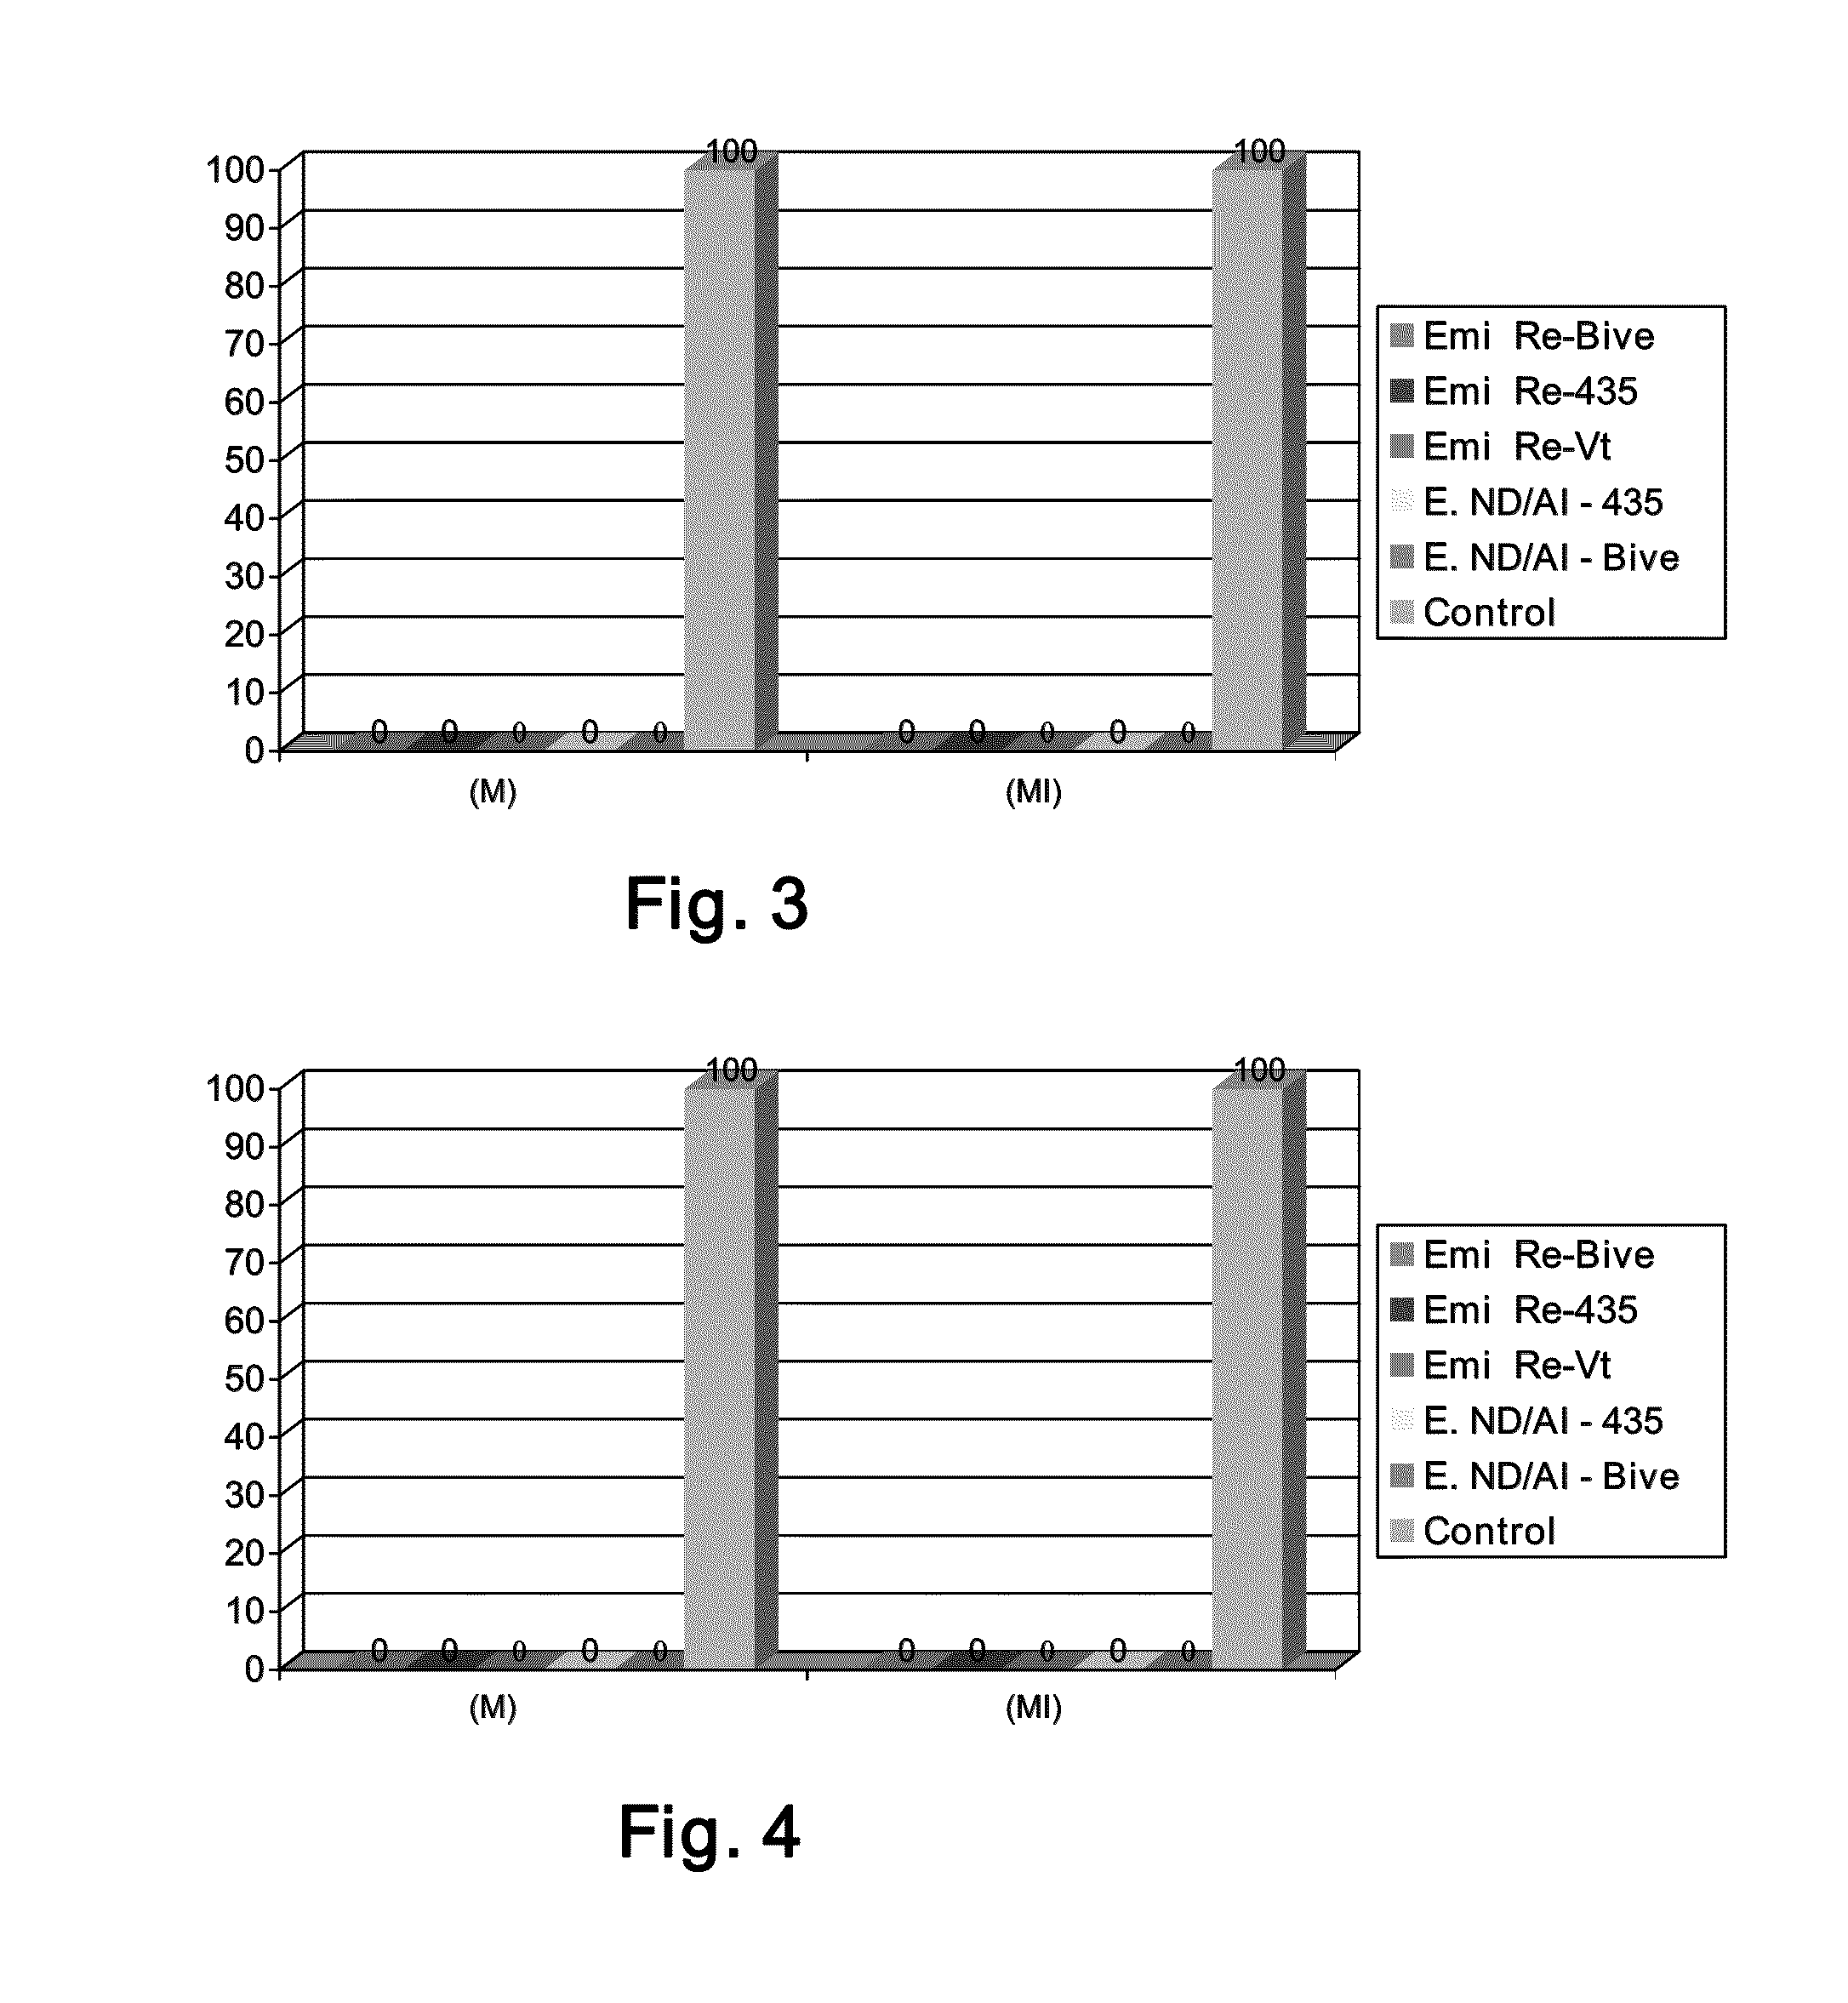 Recombinant inactivated viral vector vaccine